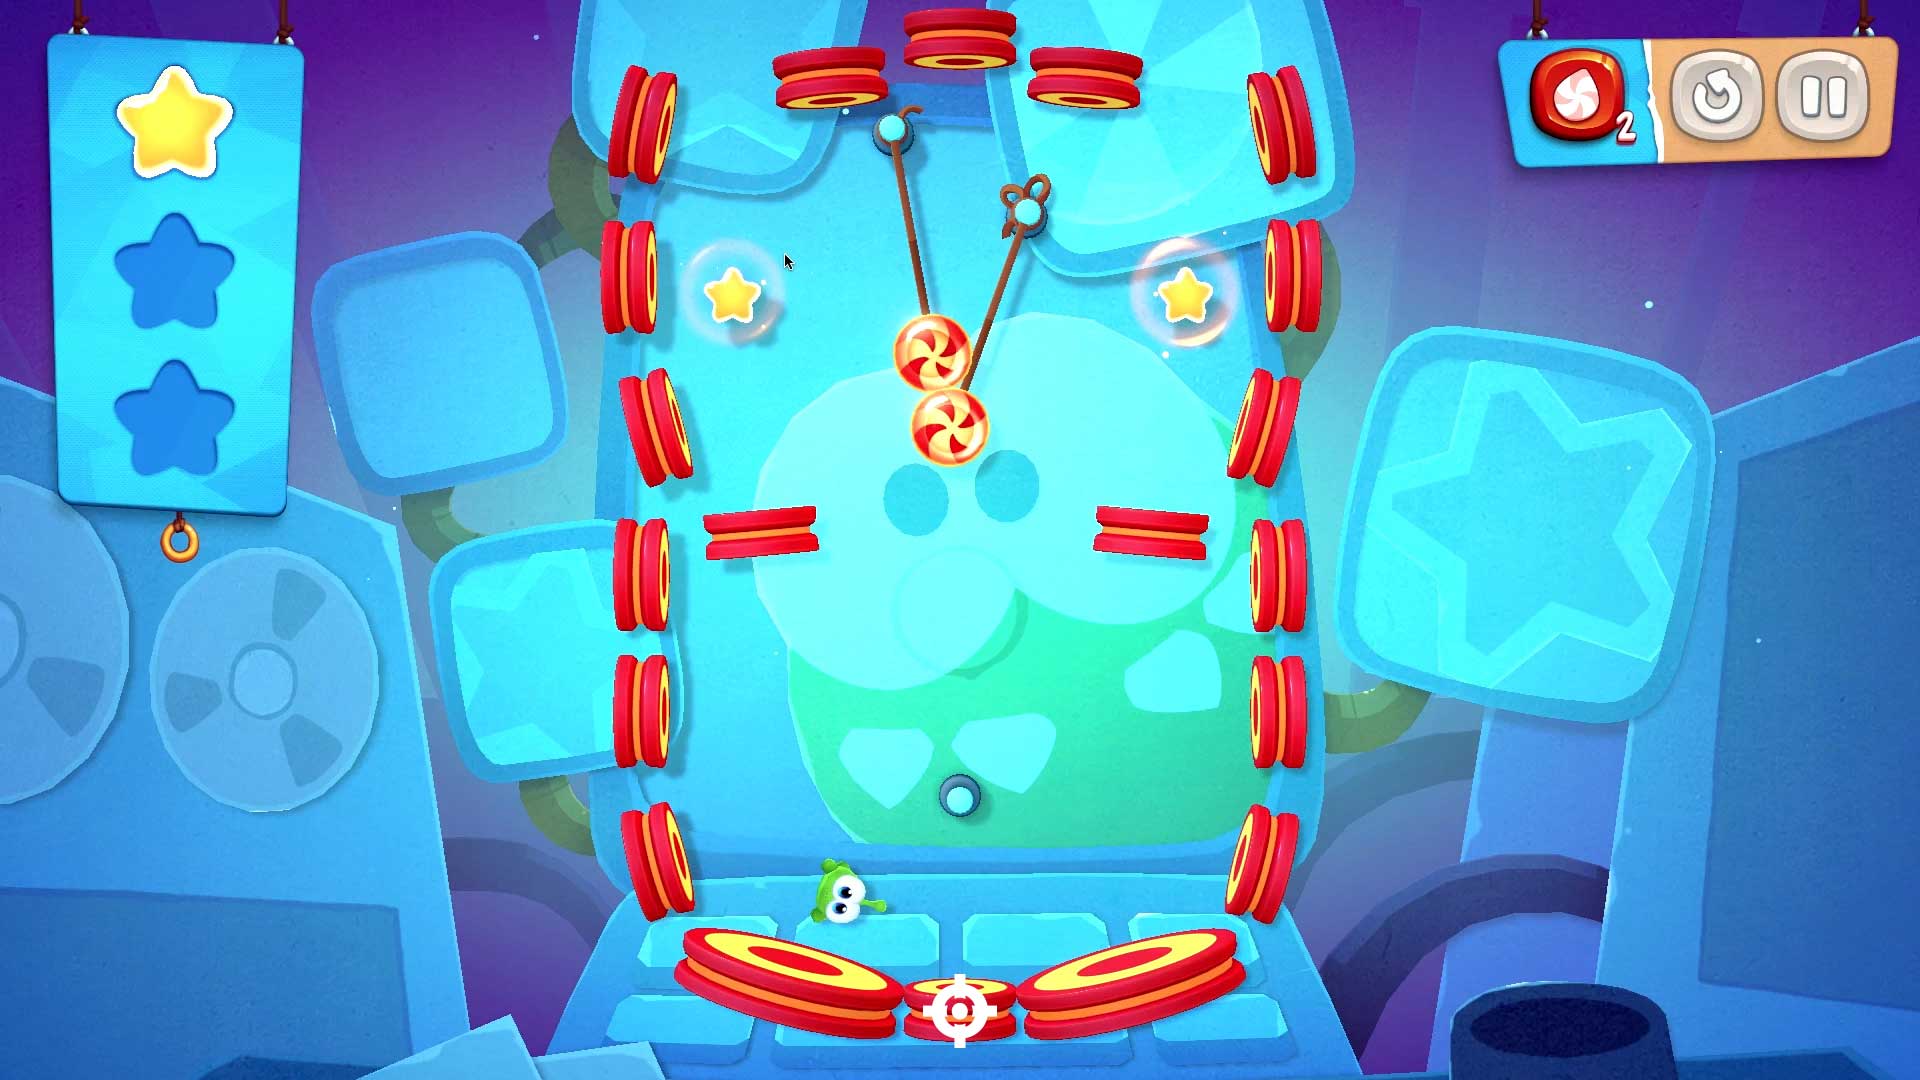 ArtStation - Cut The Rope - Remastered